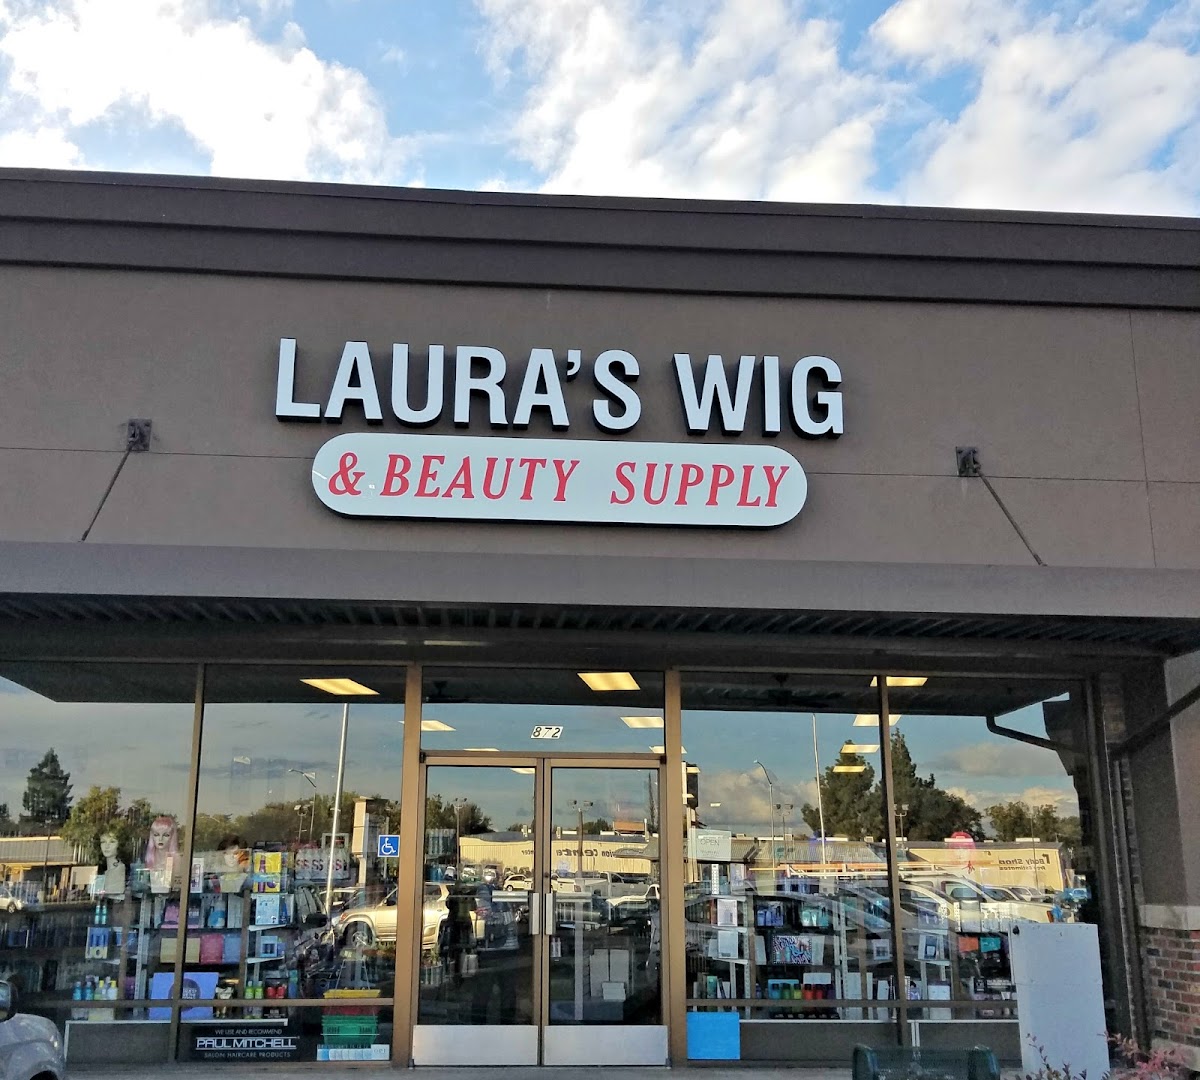 Lauras Wig & Beauty Supply and Salon